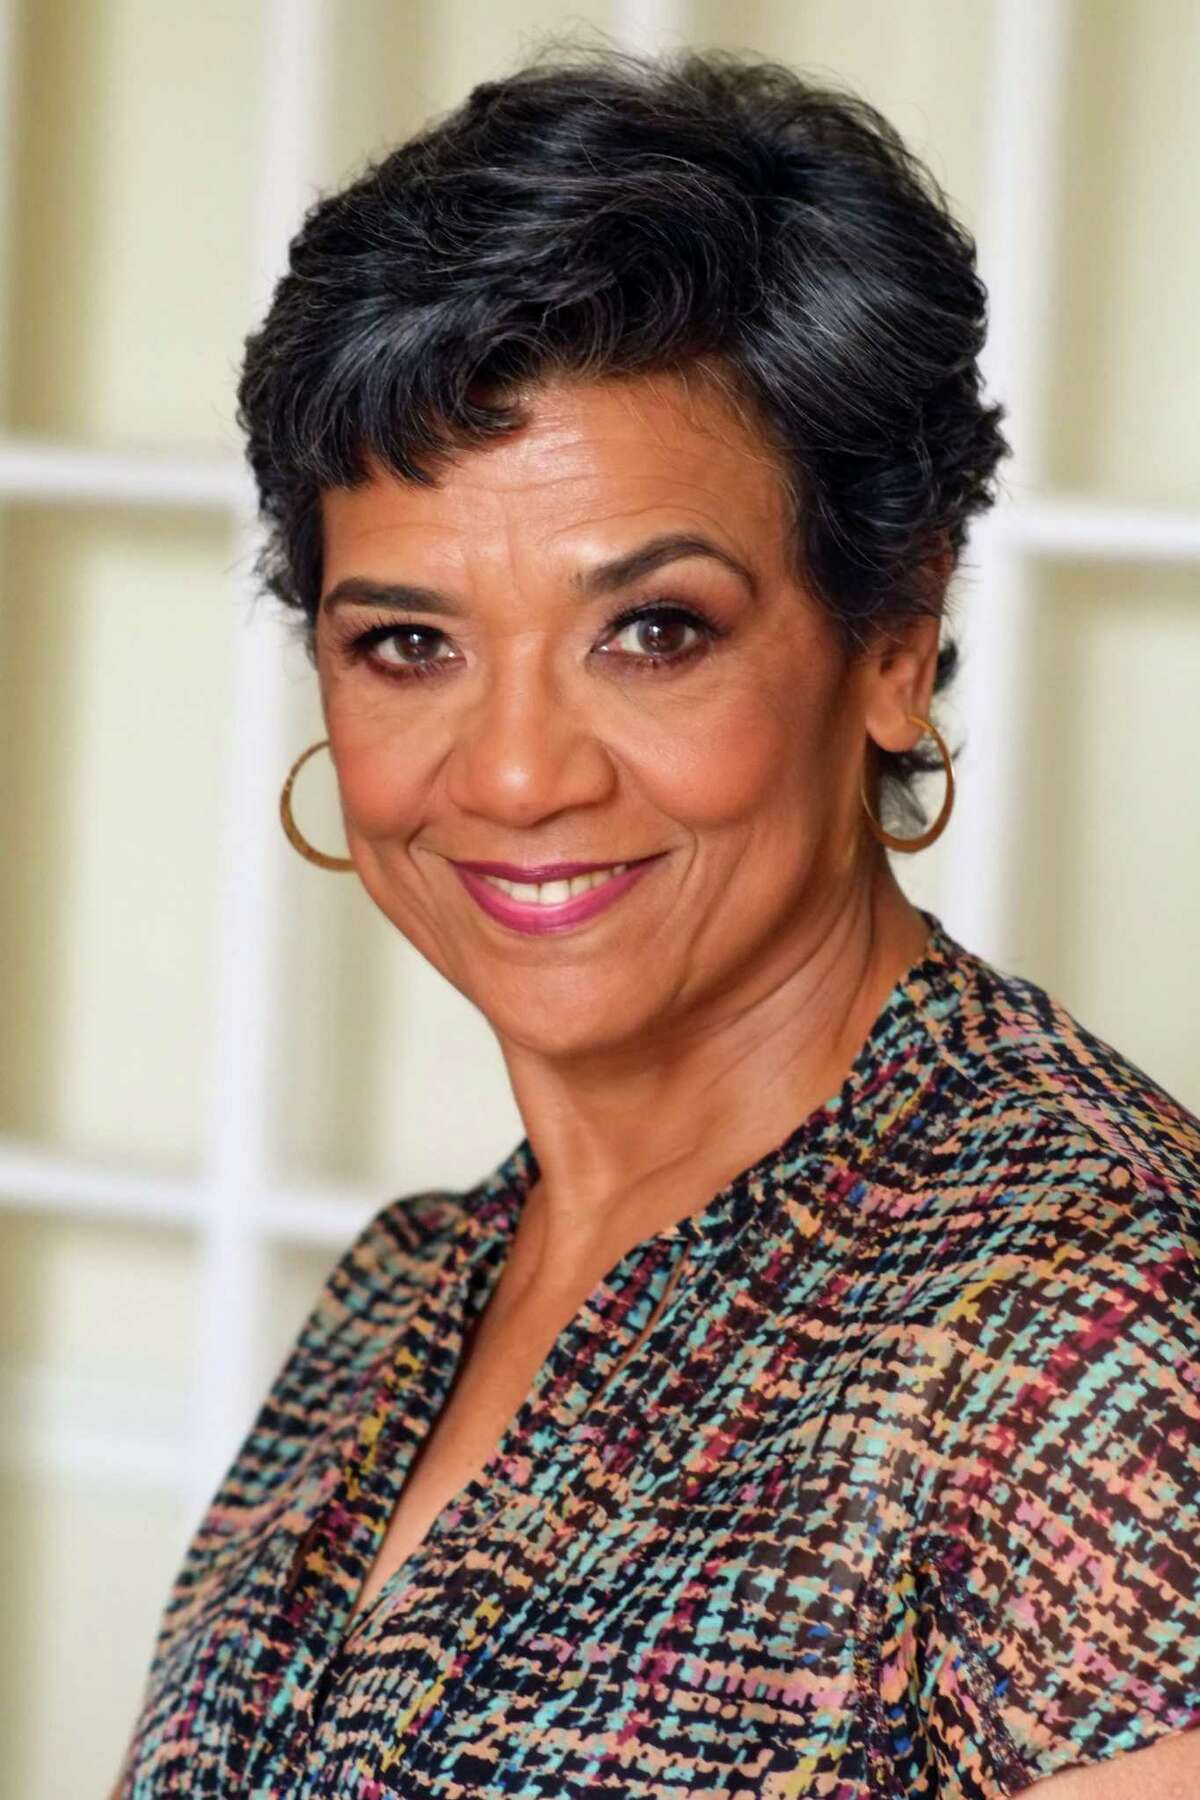 Sonia Manzano, who is known for her role as Maria on "Sesame Street" has a new YA novel, "Coming Up Cuban."